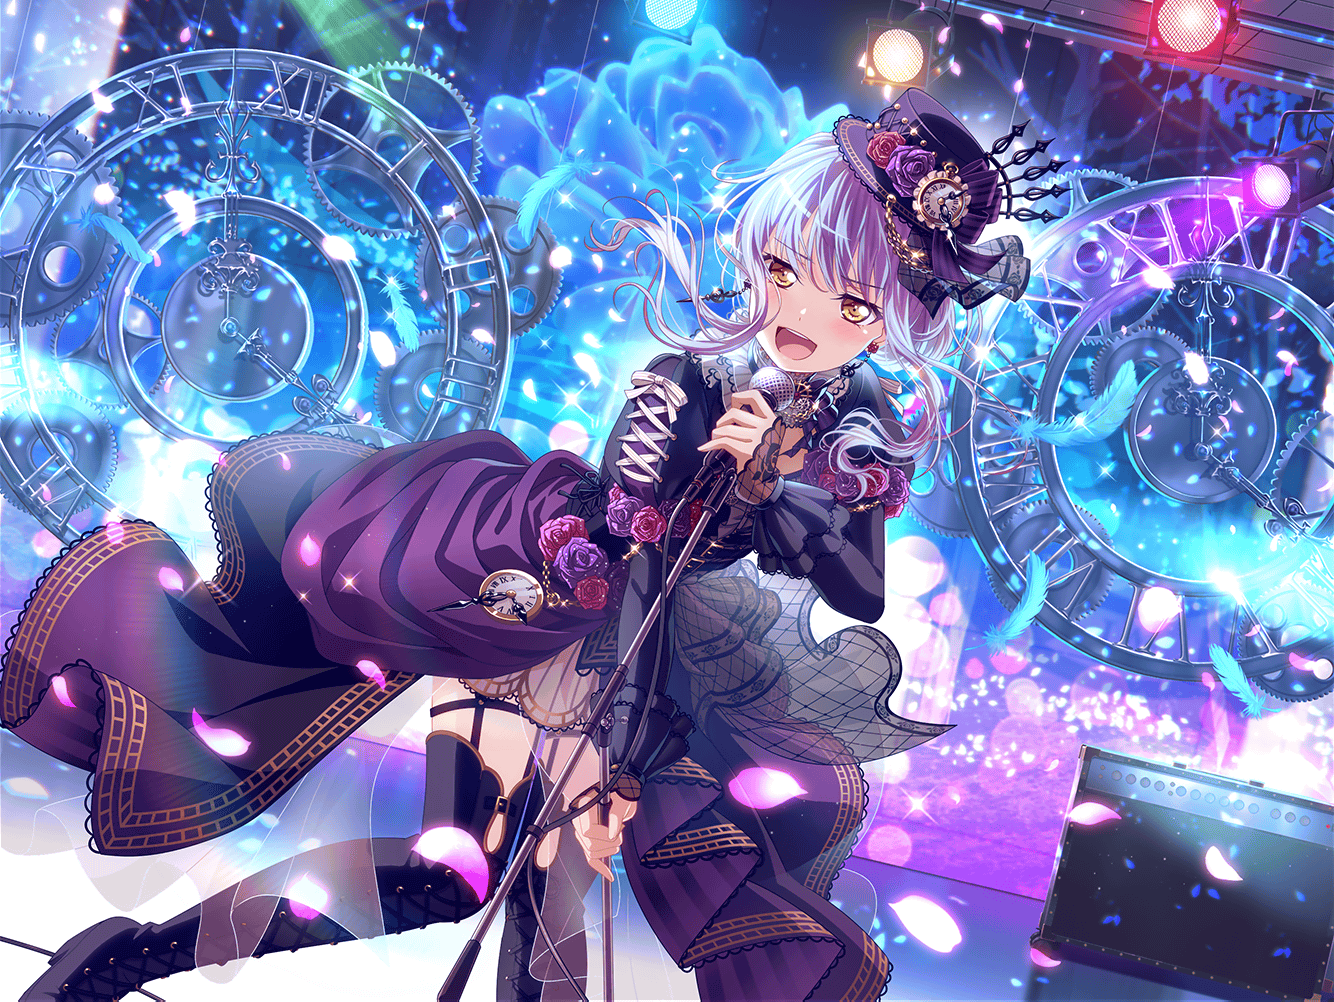 Anime 1334x1002 BanG Dream! minato yukina anime anime girls open mouth looking at viewer long hair Roman numerals clocks standing women with hats hat long sleeves petals microphone earring black thigh-highs thigh-highs pocket watch time feathers dress singing stage light lights sparkles